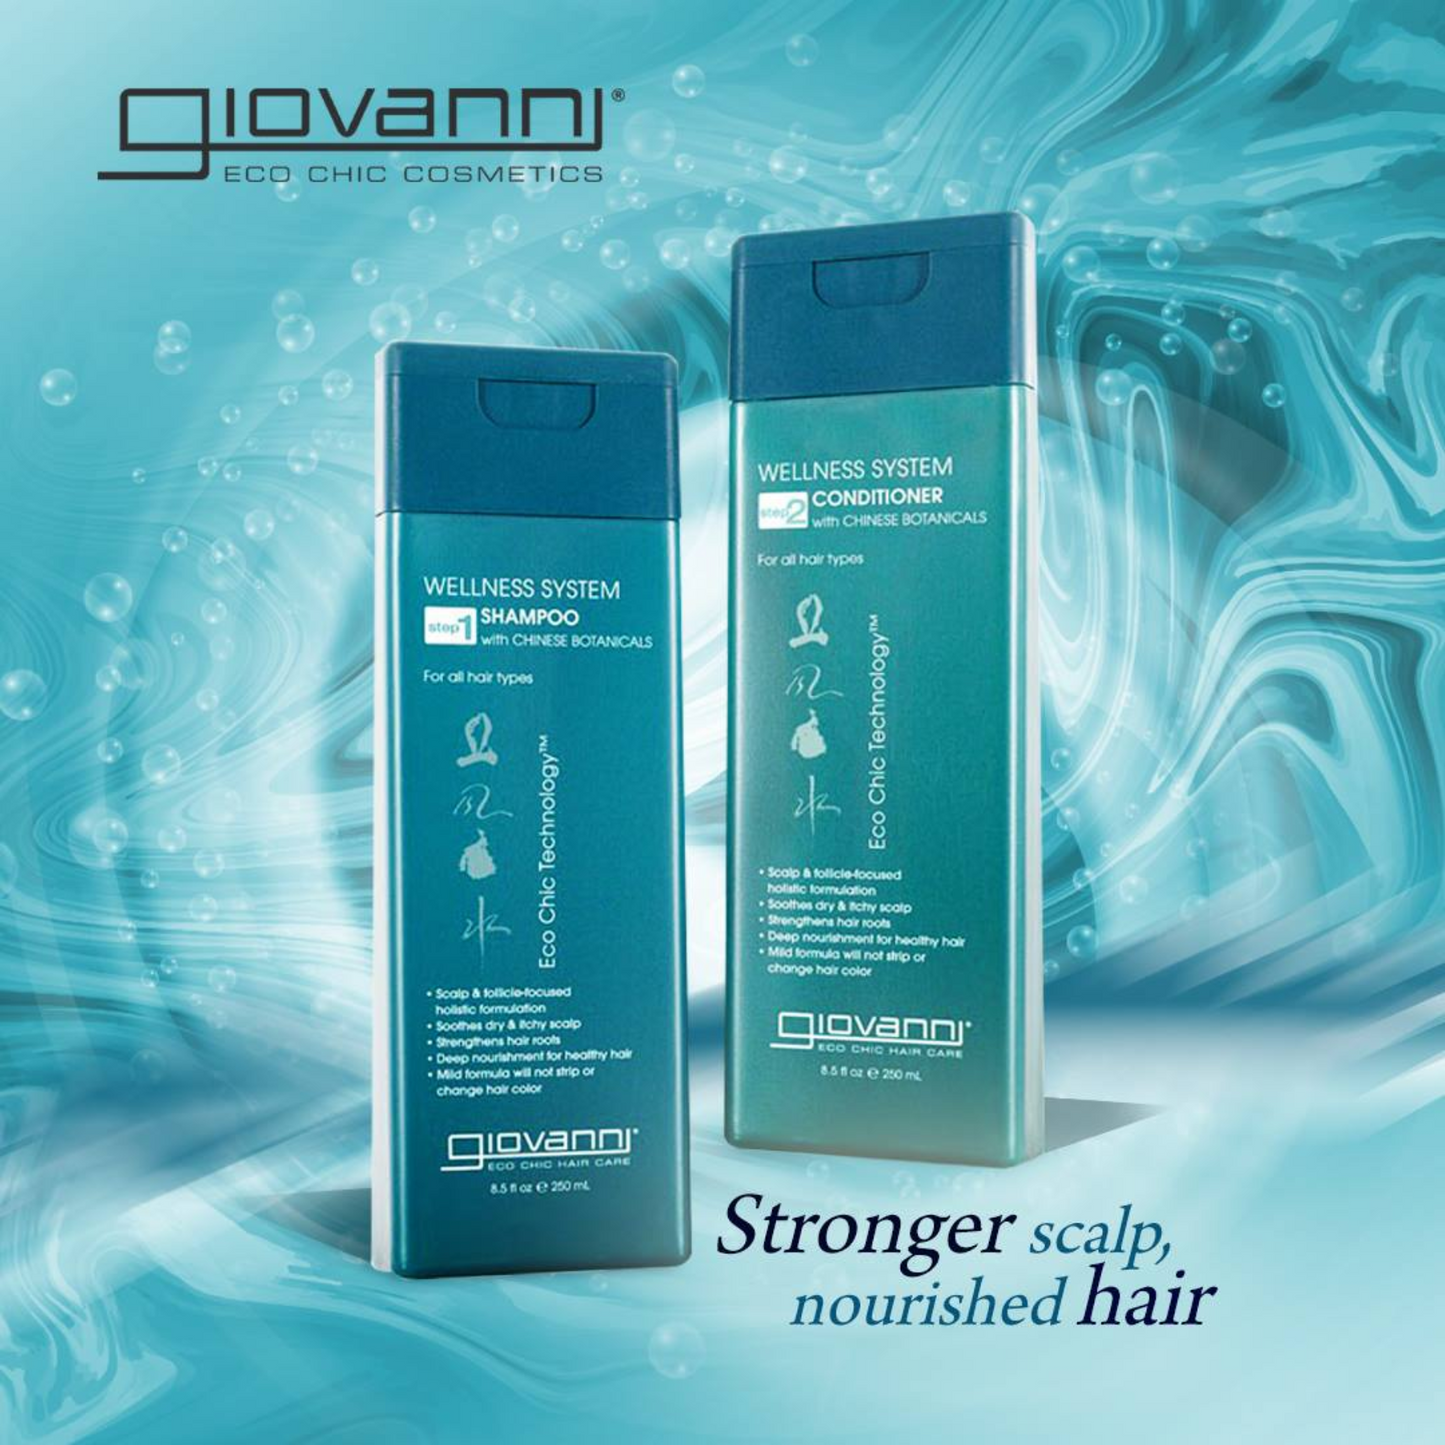 Giovanni Wellness System with Chinese Botanicals Shampoo 250ml, Deep Nourishment For Healthy Hair